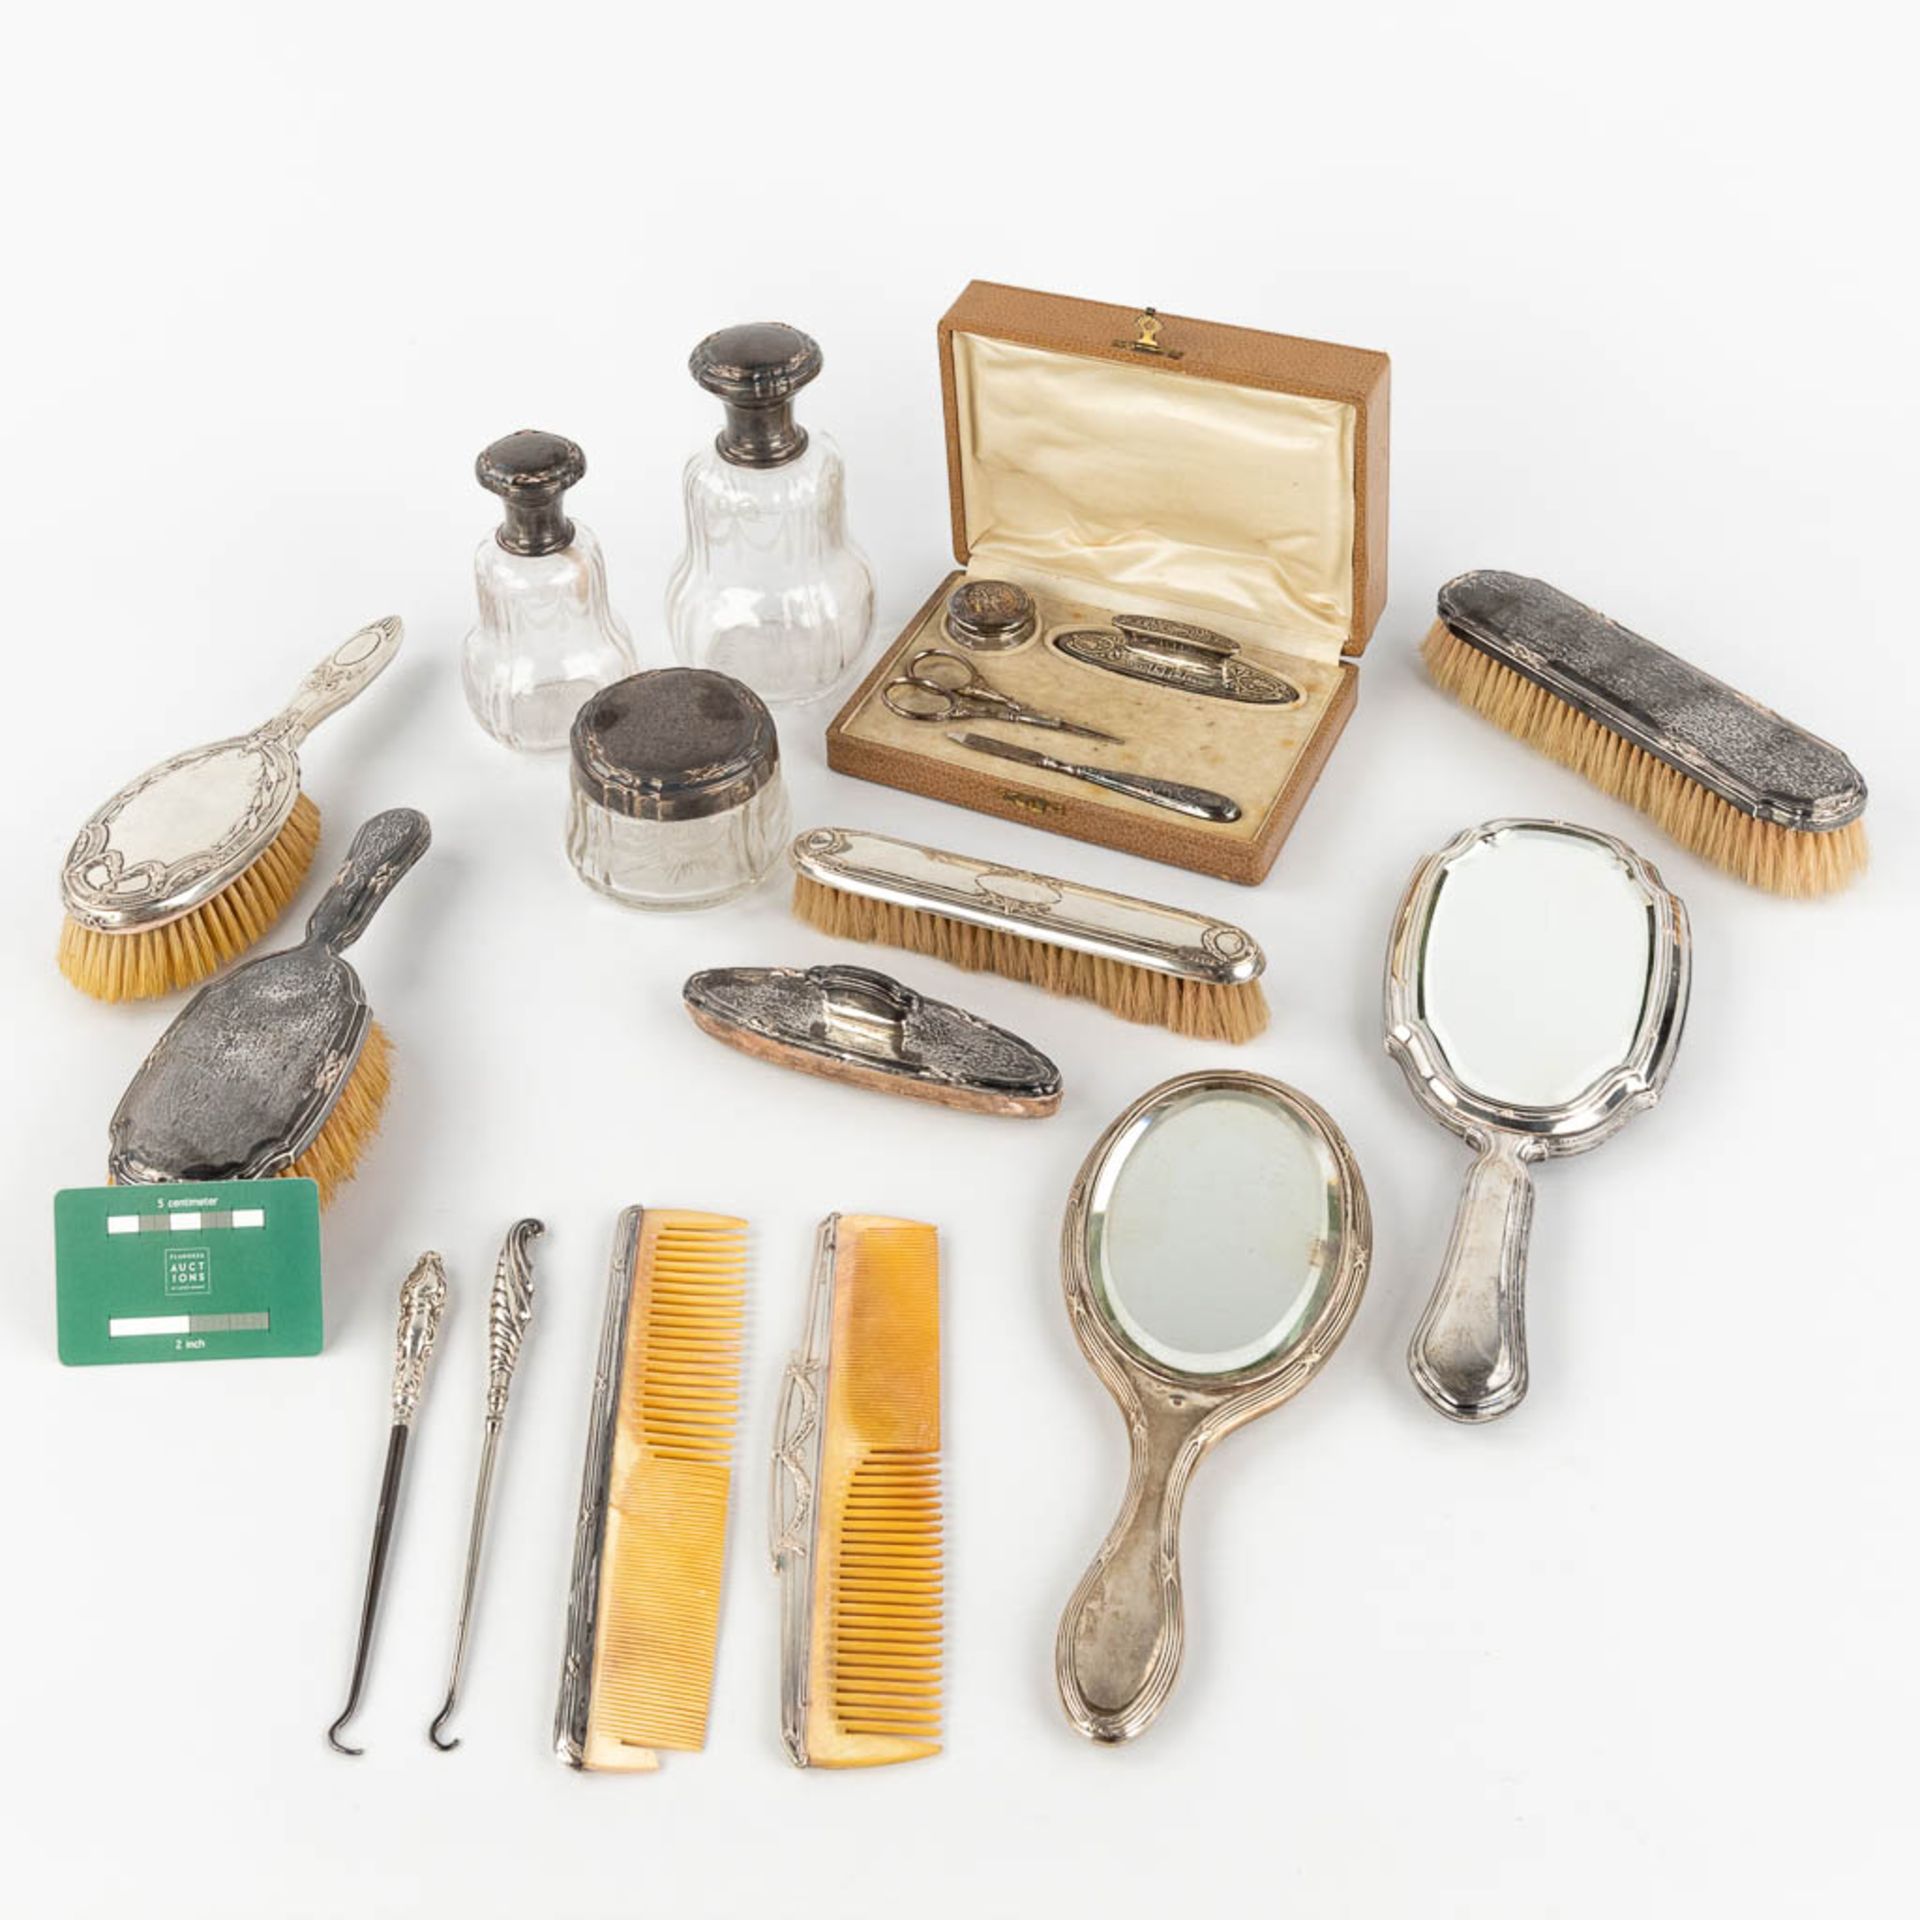 An assembled collection of table accessories, 14 pieces, added a manicure set in a box. (H: 16 cm) - Image 2 of 11